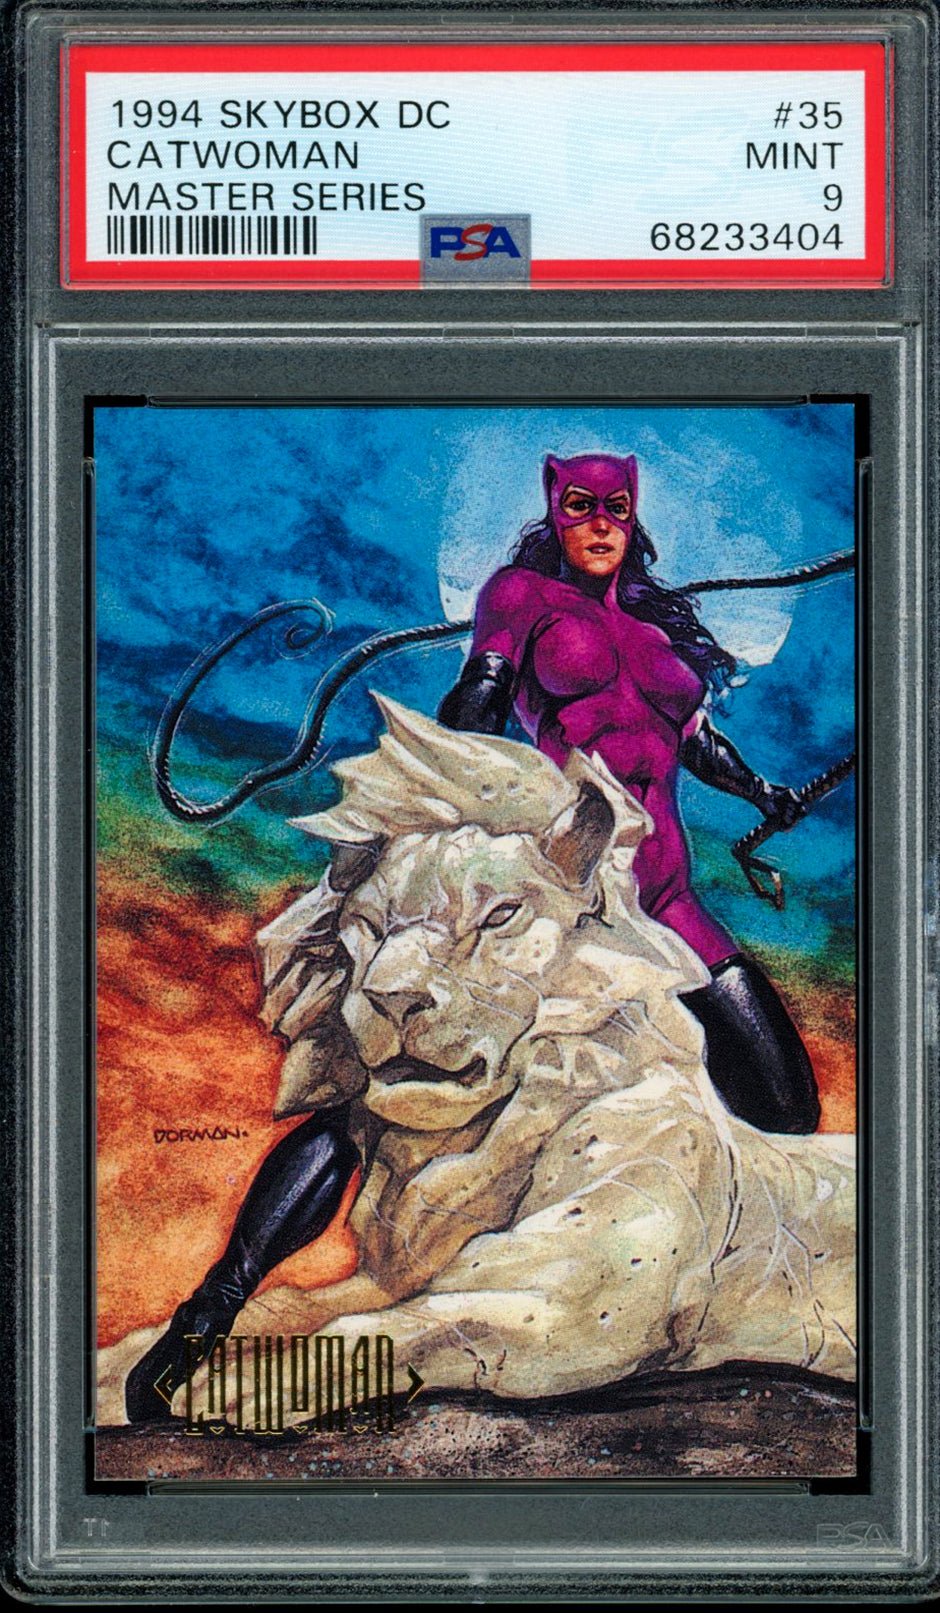 CATWOMAN PSA 9 1994 Skybox DC Master Series #35 DC Comics Base Graded Cards - Hobby Gems